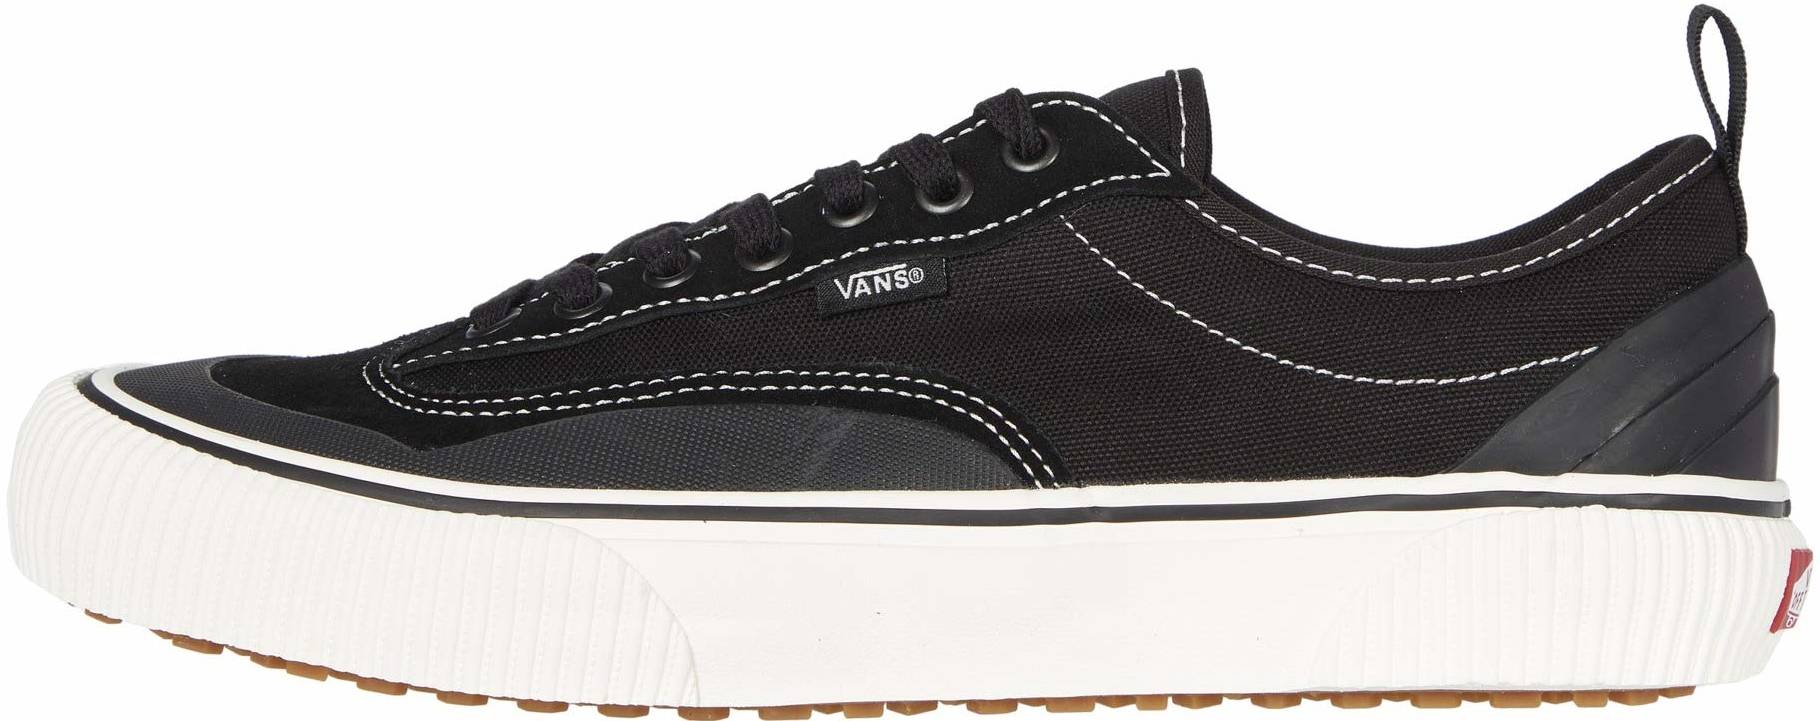 40+ Vans UltraCush sneakers: Save up to 